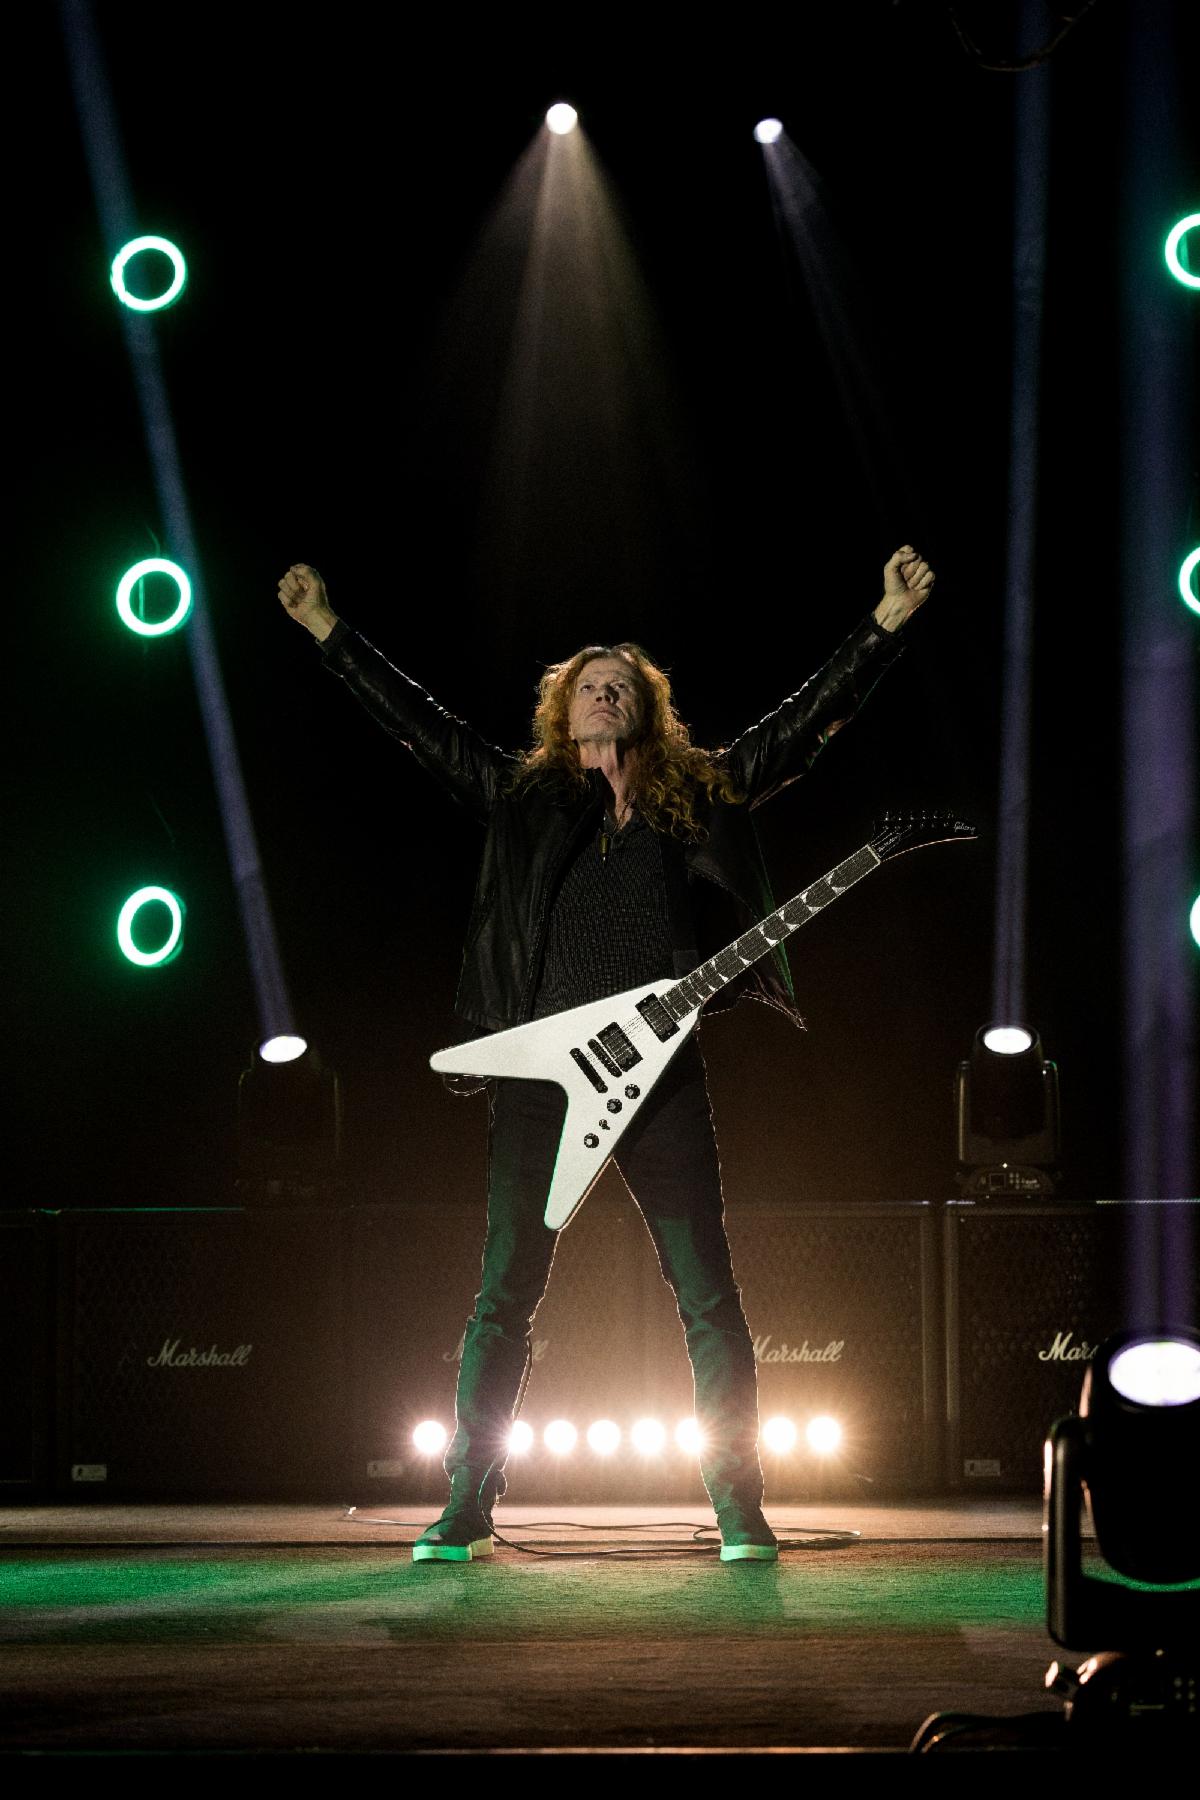 Dave Mustaine with his Gibson USA Flying V EXP in Silver Metallic.